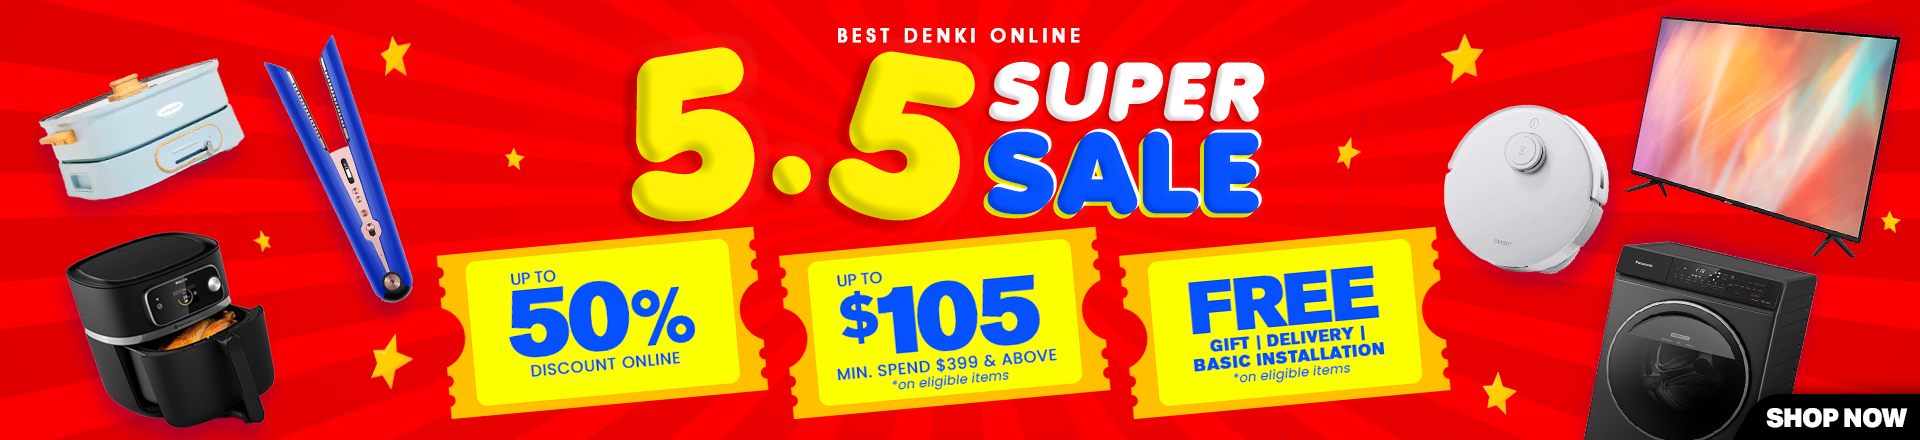 55supersale-may24